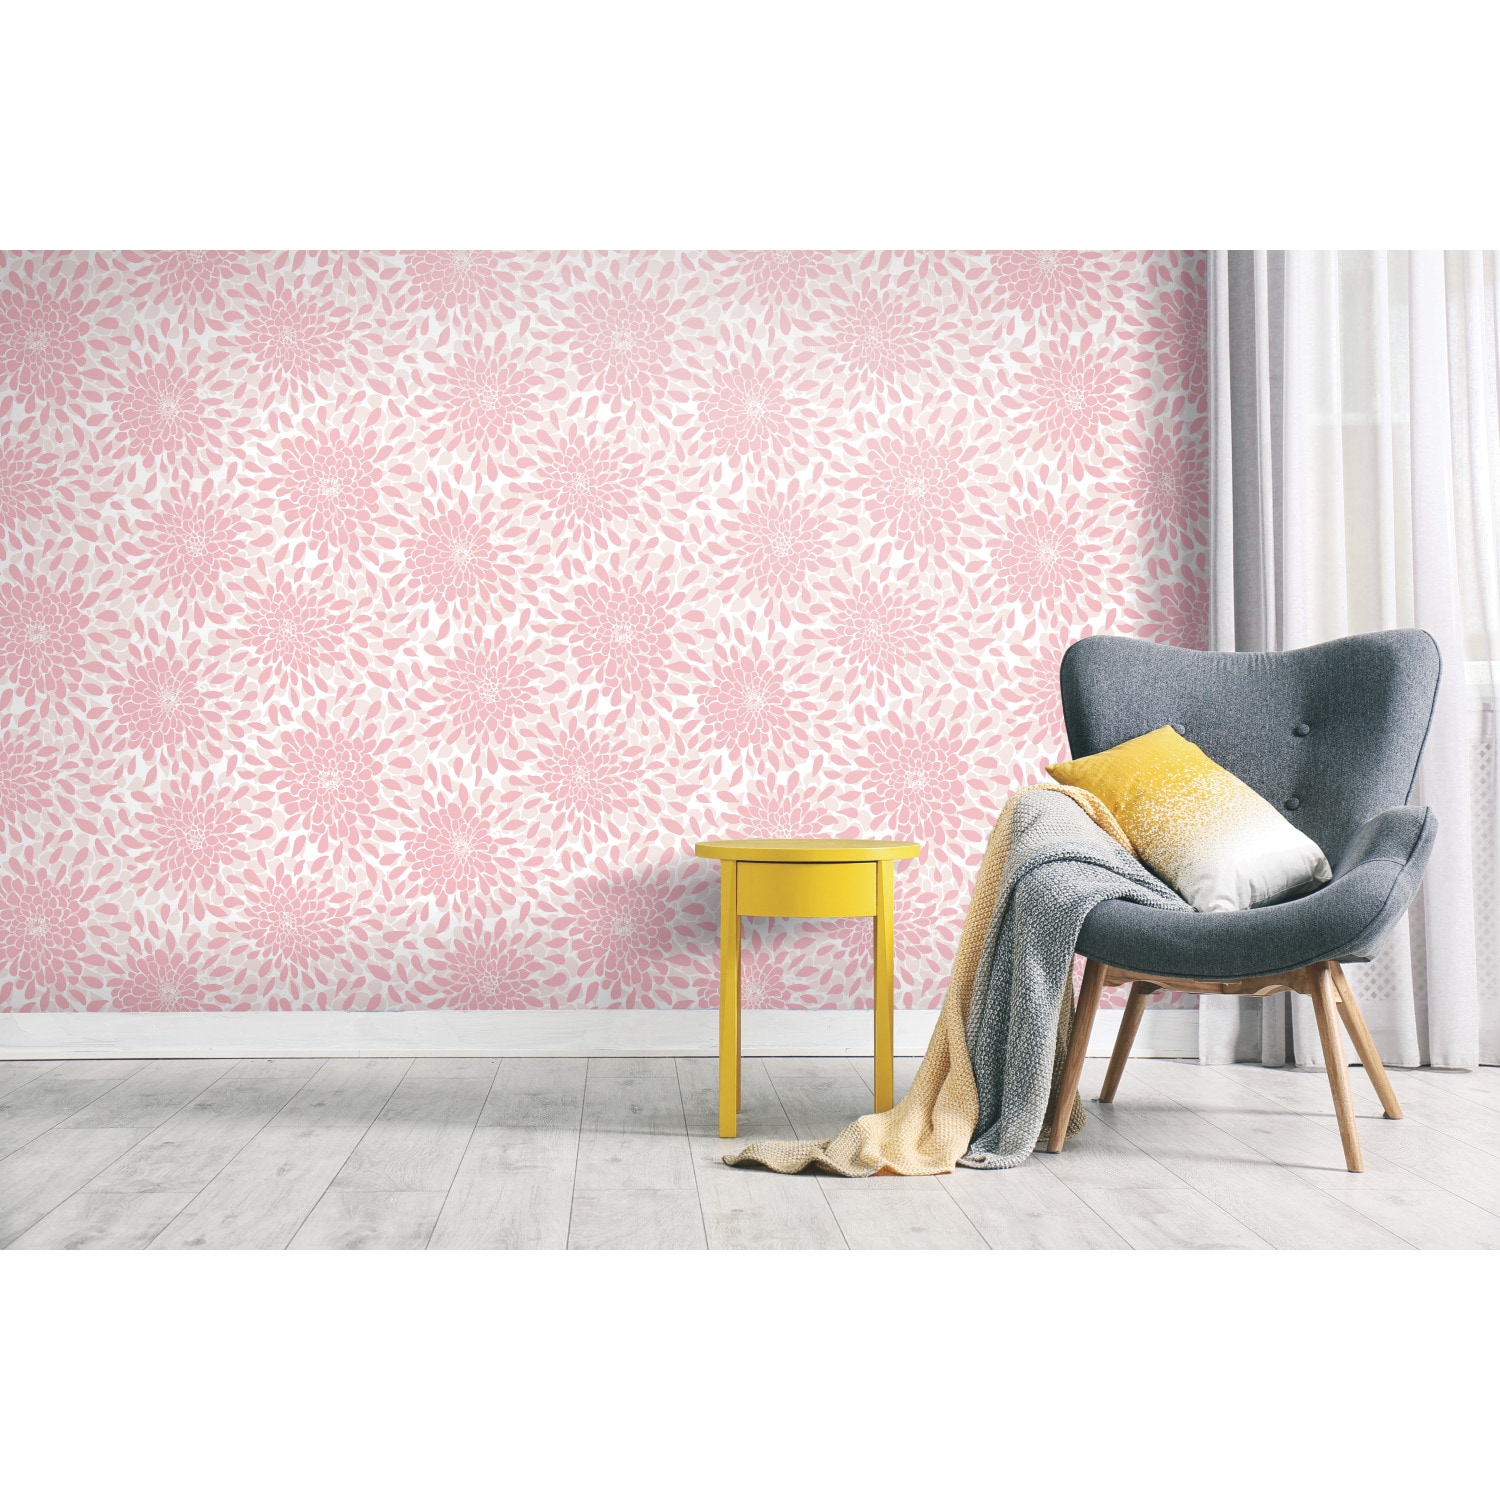 RoomMates 28.18-sq ft Pink Vinyl Floral Self-adhesive Peel and Stick ...